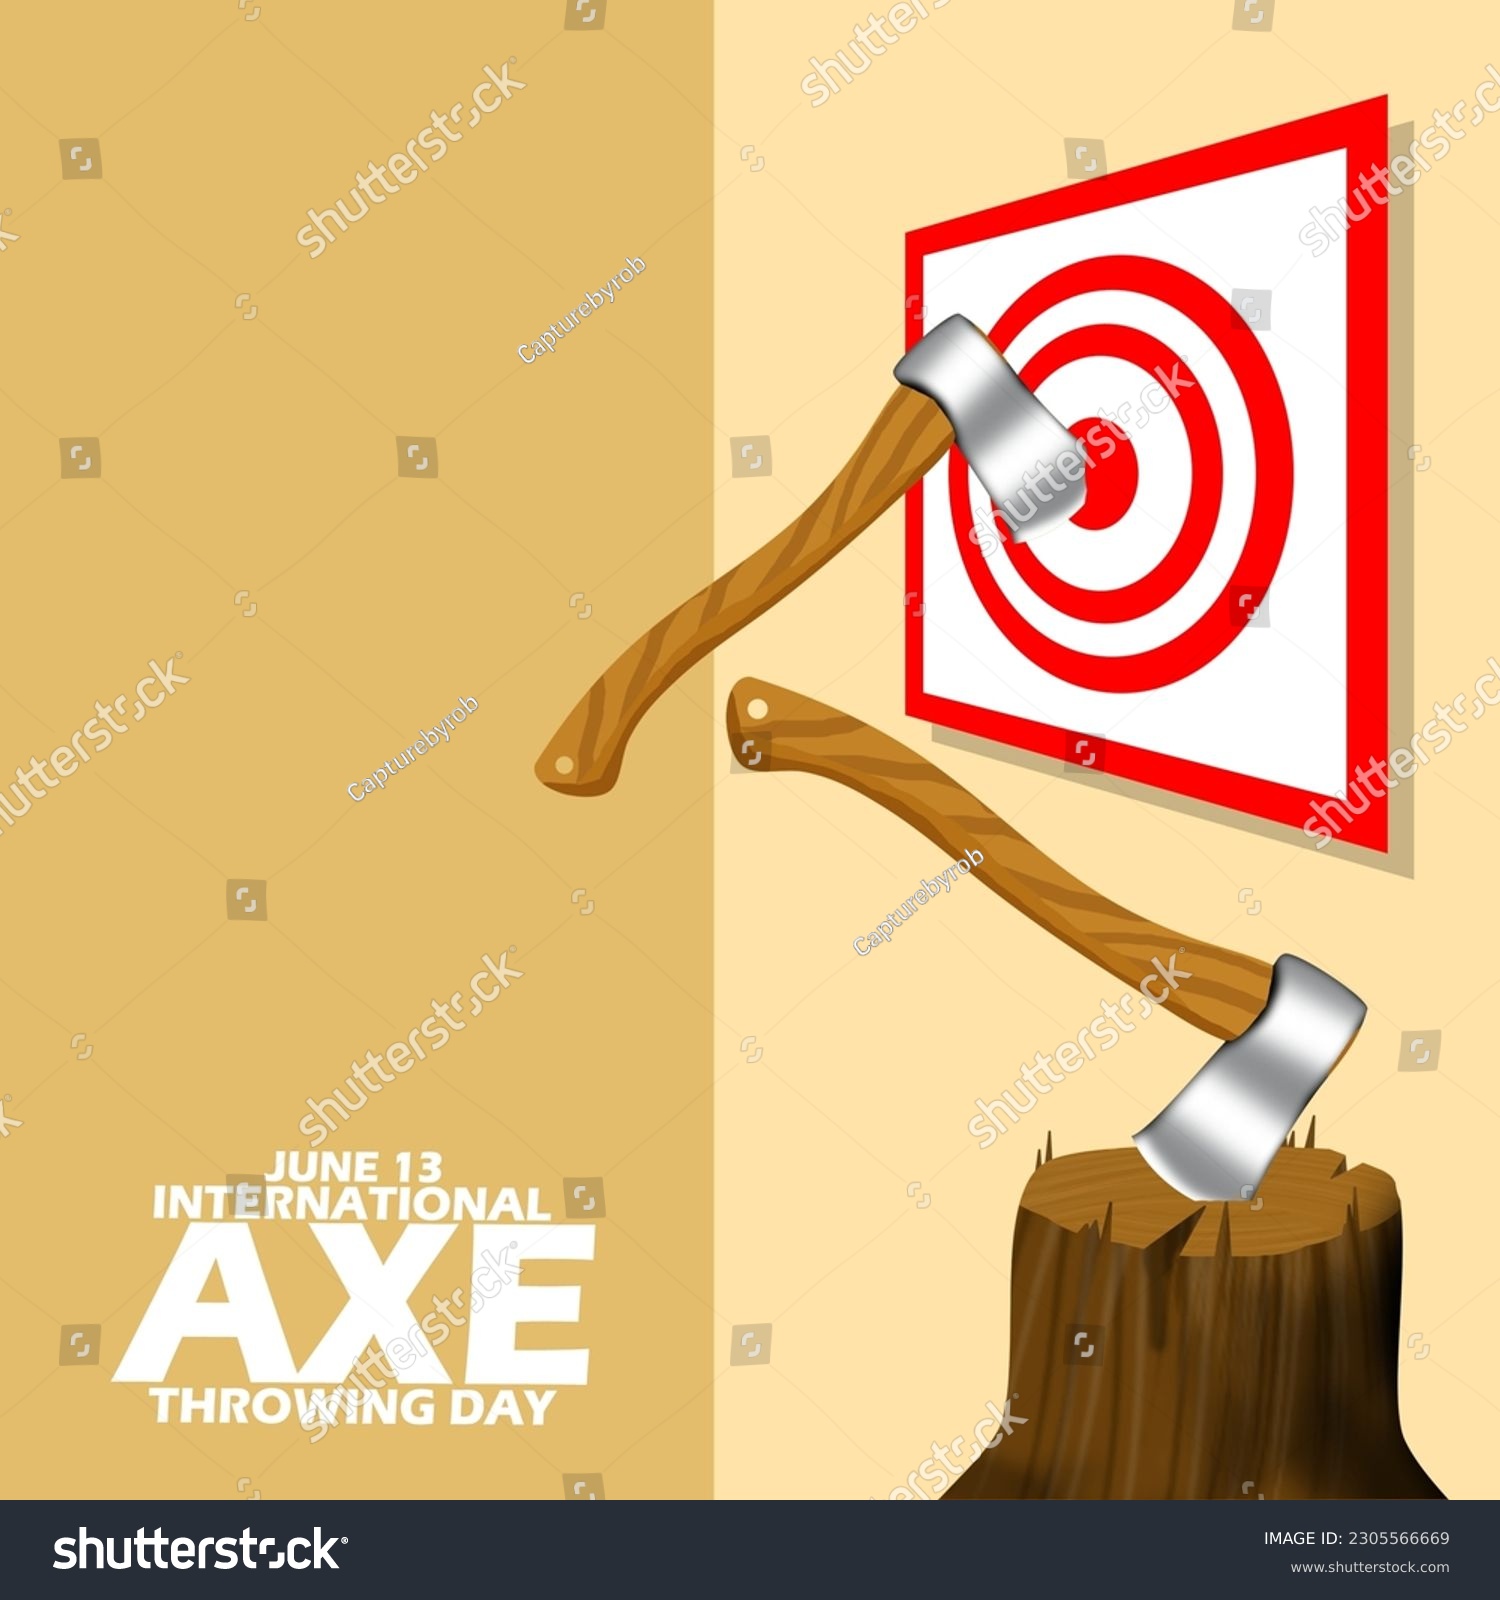 SVG of Axe throwing activity stuck in the wall of the target box with bold text on light brown background to celebrate International Axe Throwing Day on June 13 svg